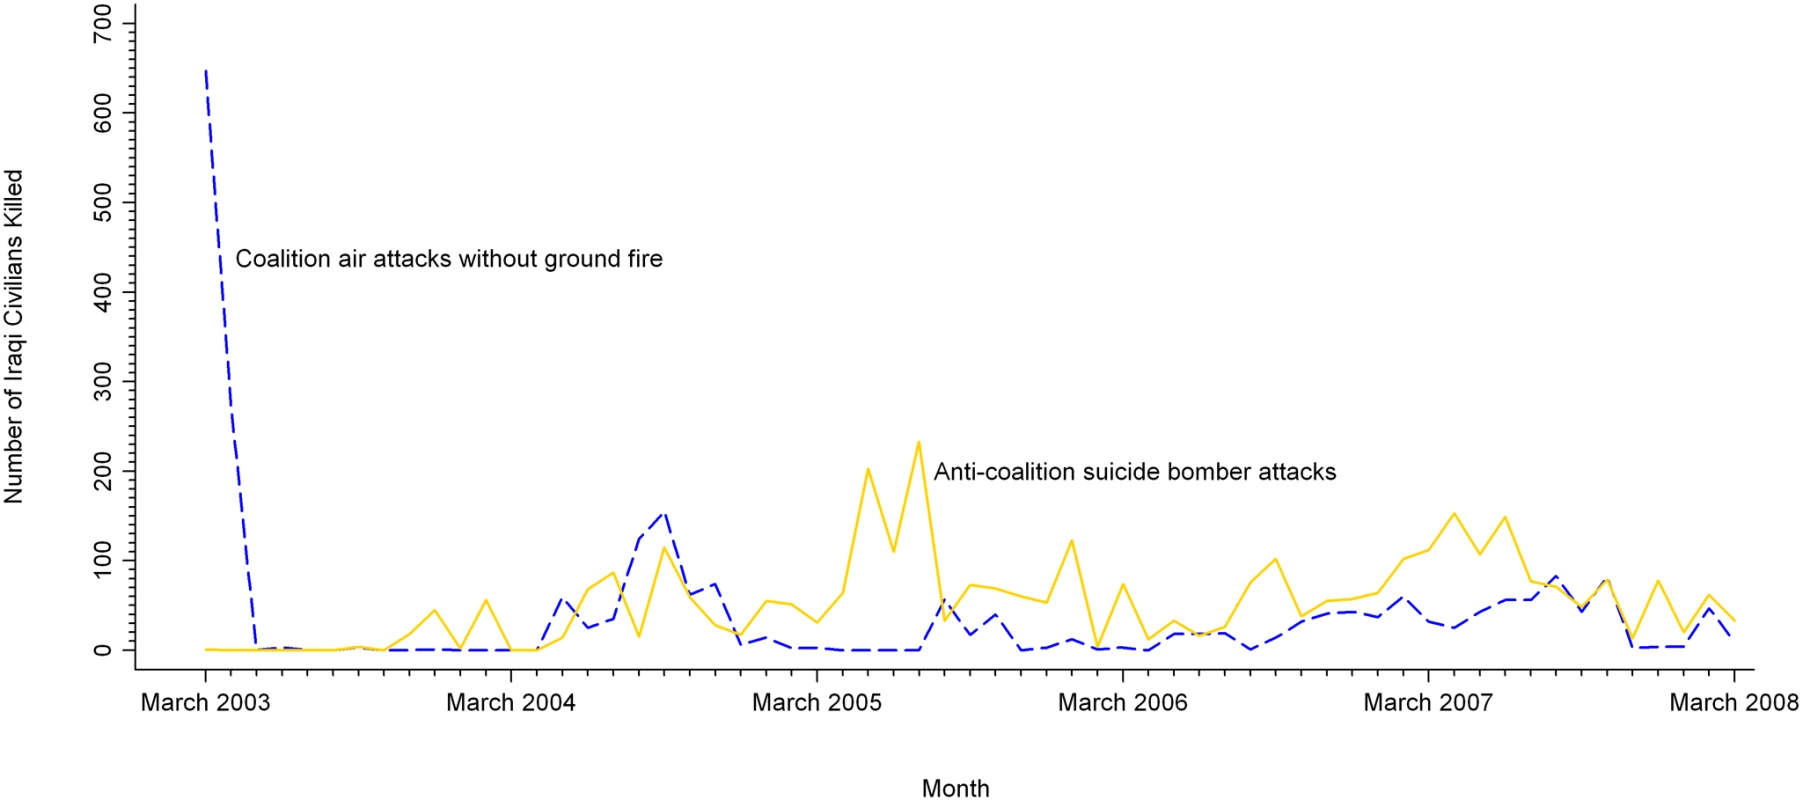 Monthly civilian deaths from Coalition air attacks and Anti-Coalition suicide bombers.